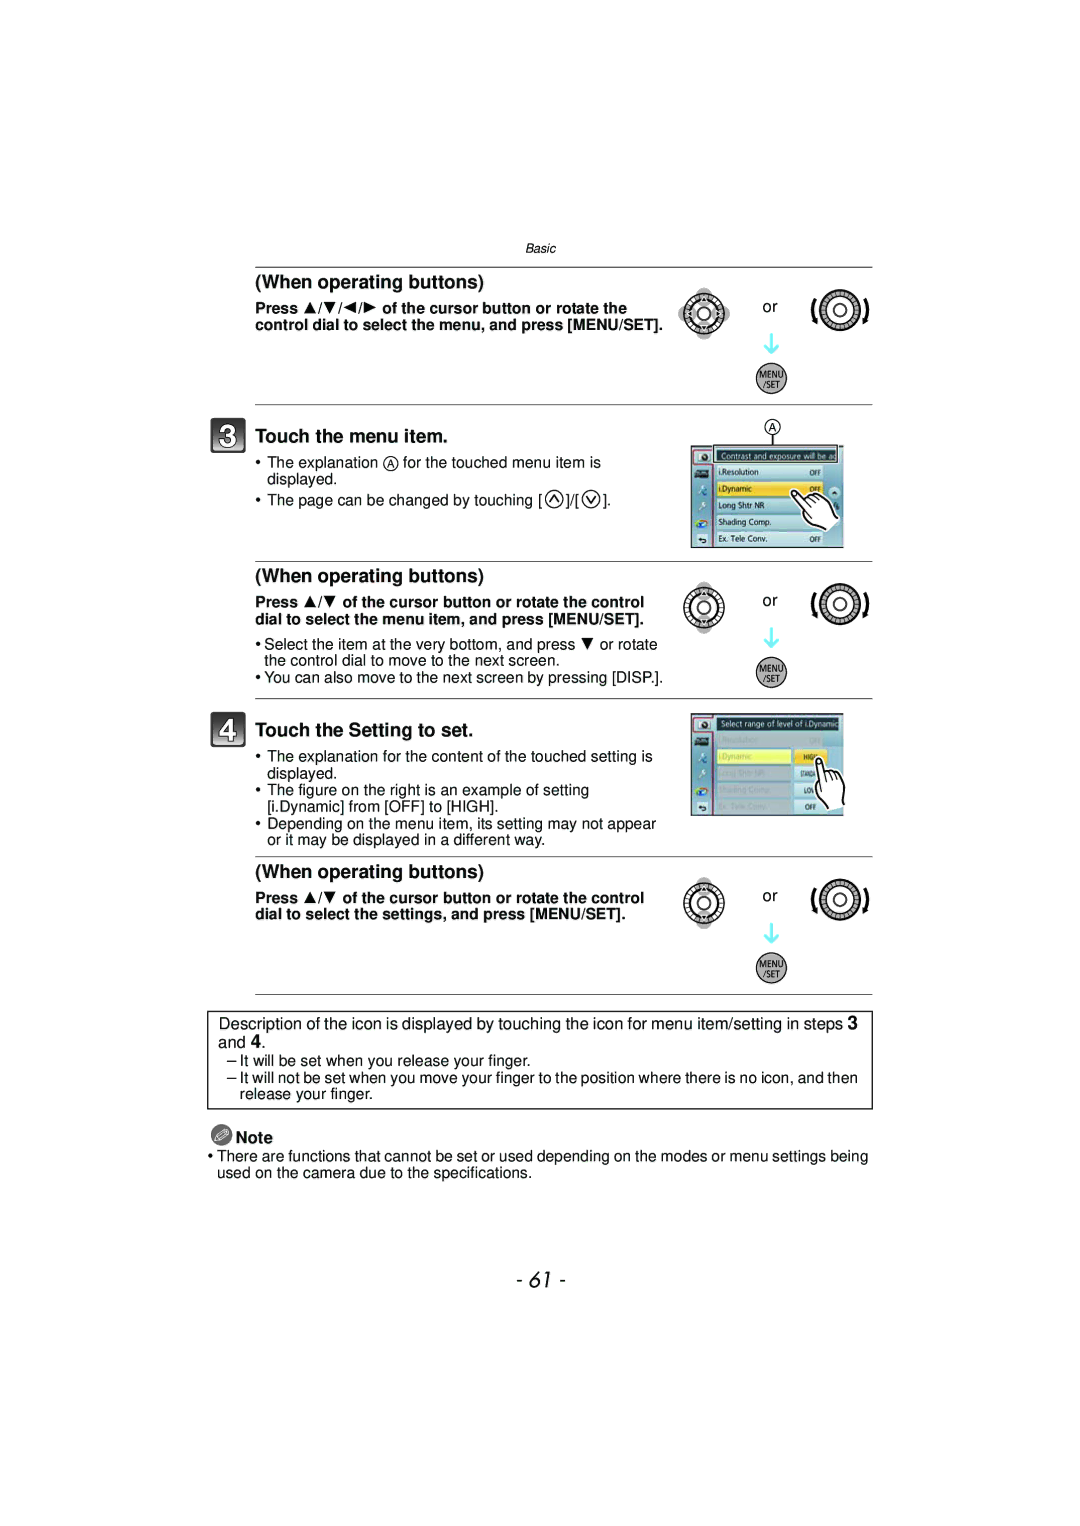 Panasonic DMC-GF5 owner manual When operating buttons, Touch the menu item, Touch the Setting to set 